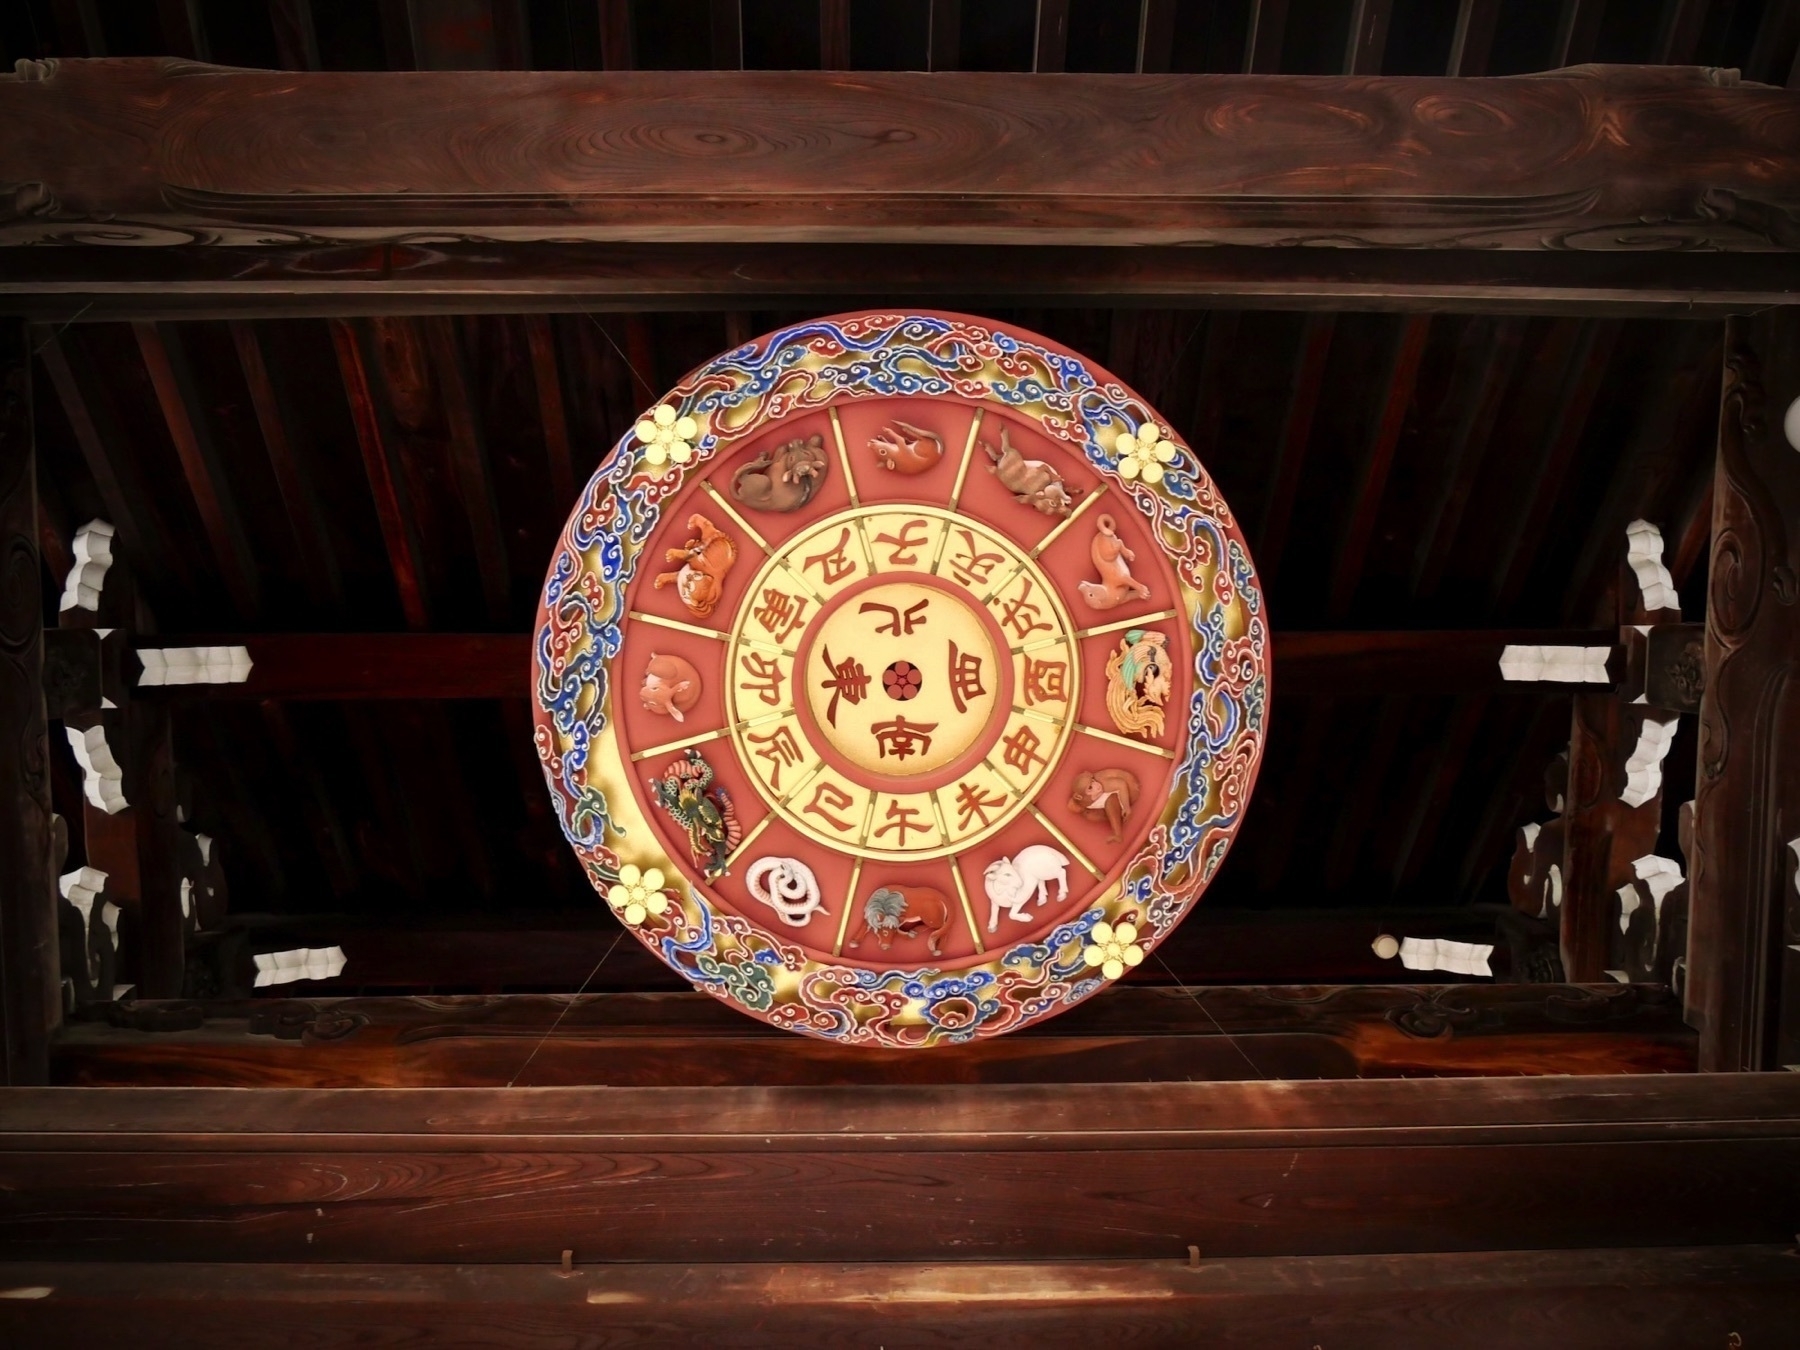 Large circular display of the Chinese zodiac. Photo taken from directly below